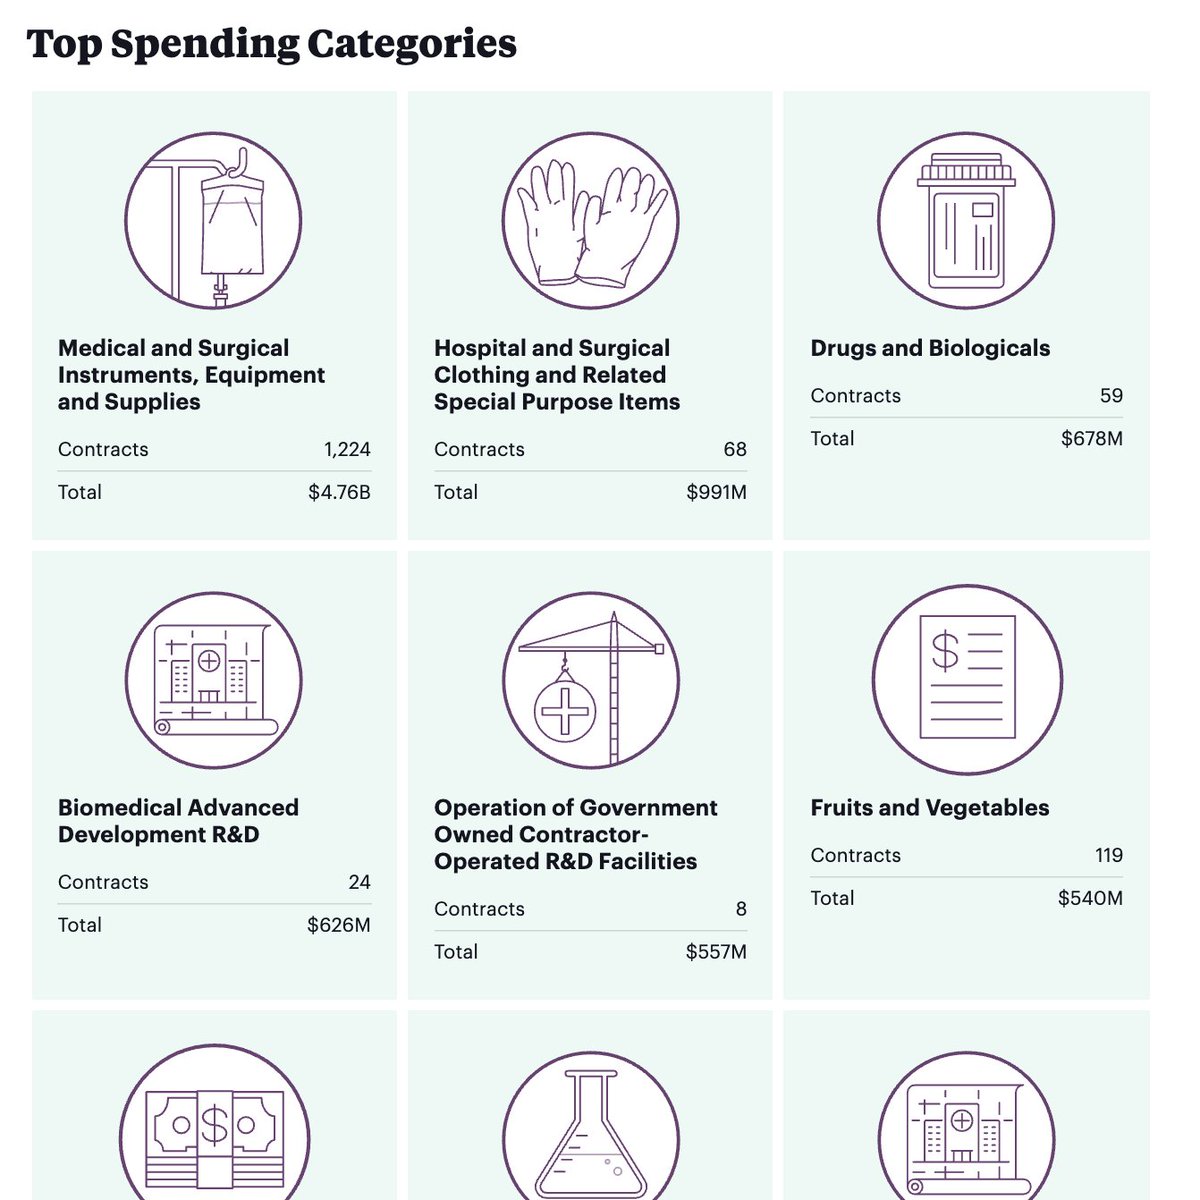 So far, the government committed the most money to buying medical and surgical supplies. Here’s a list of the top things we’ve been buying...